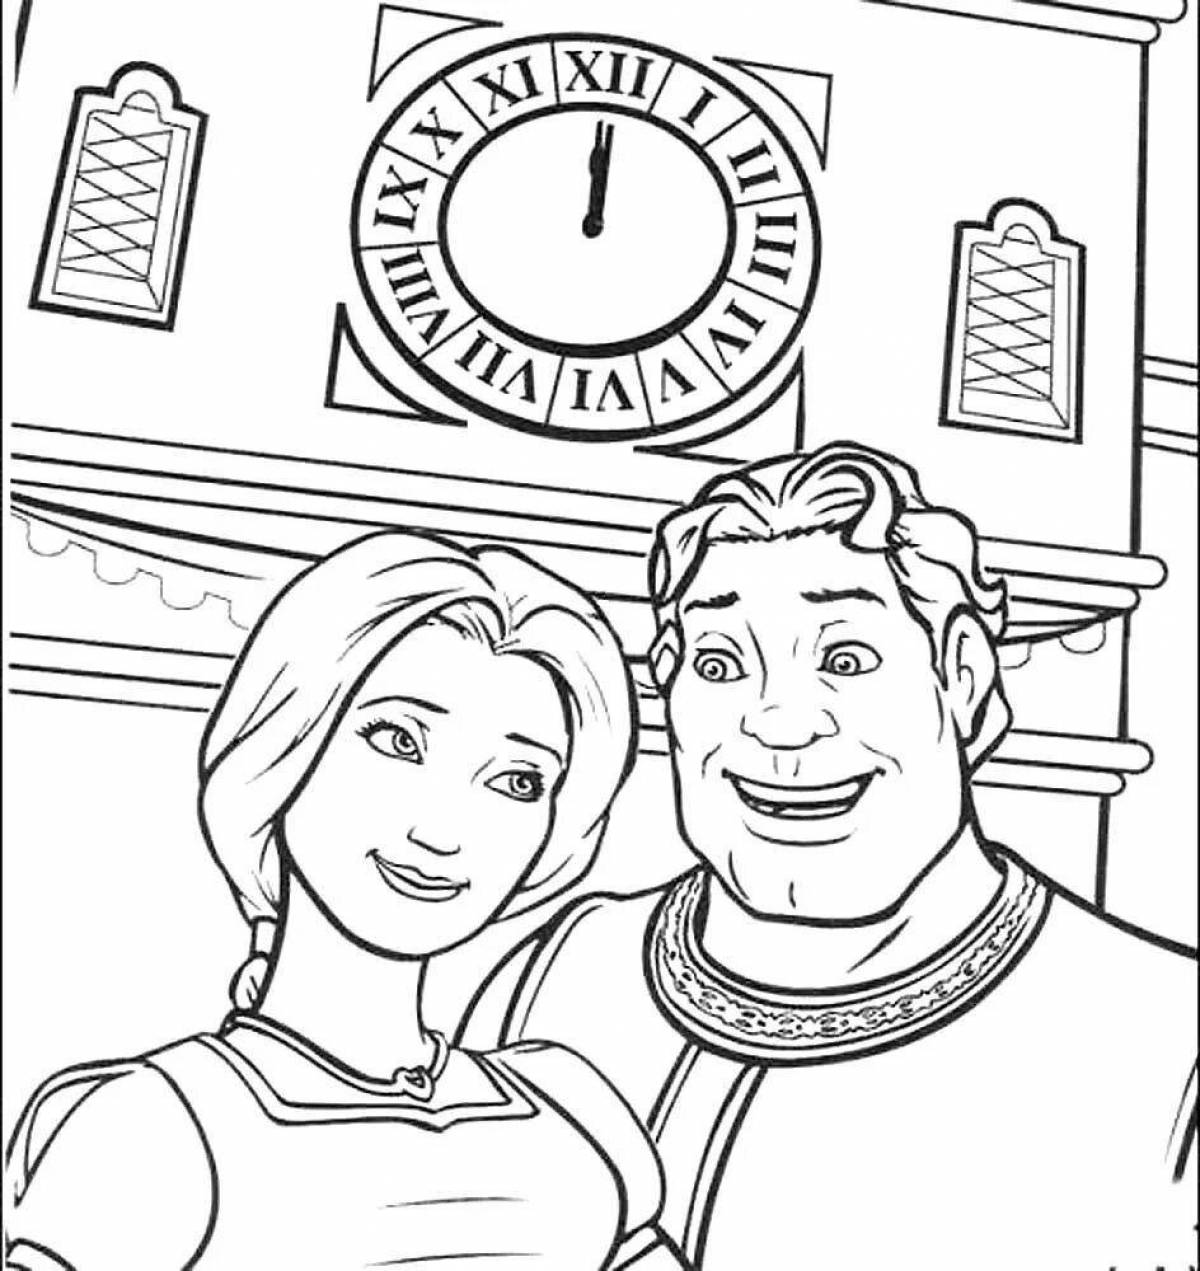 Animated fiona coloring book